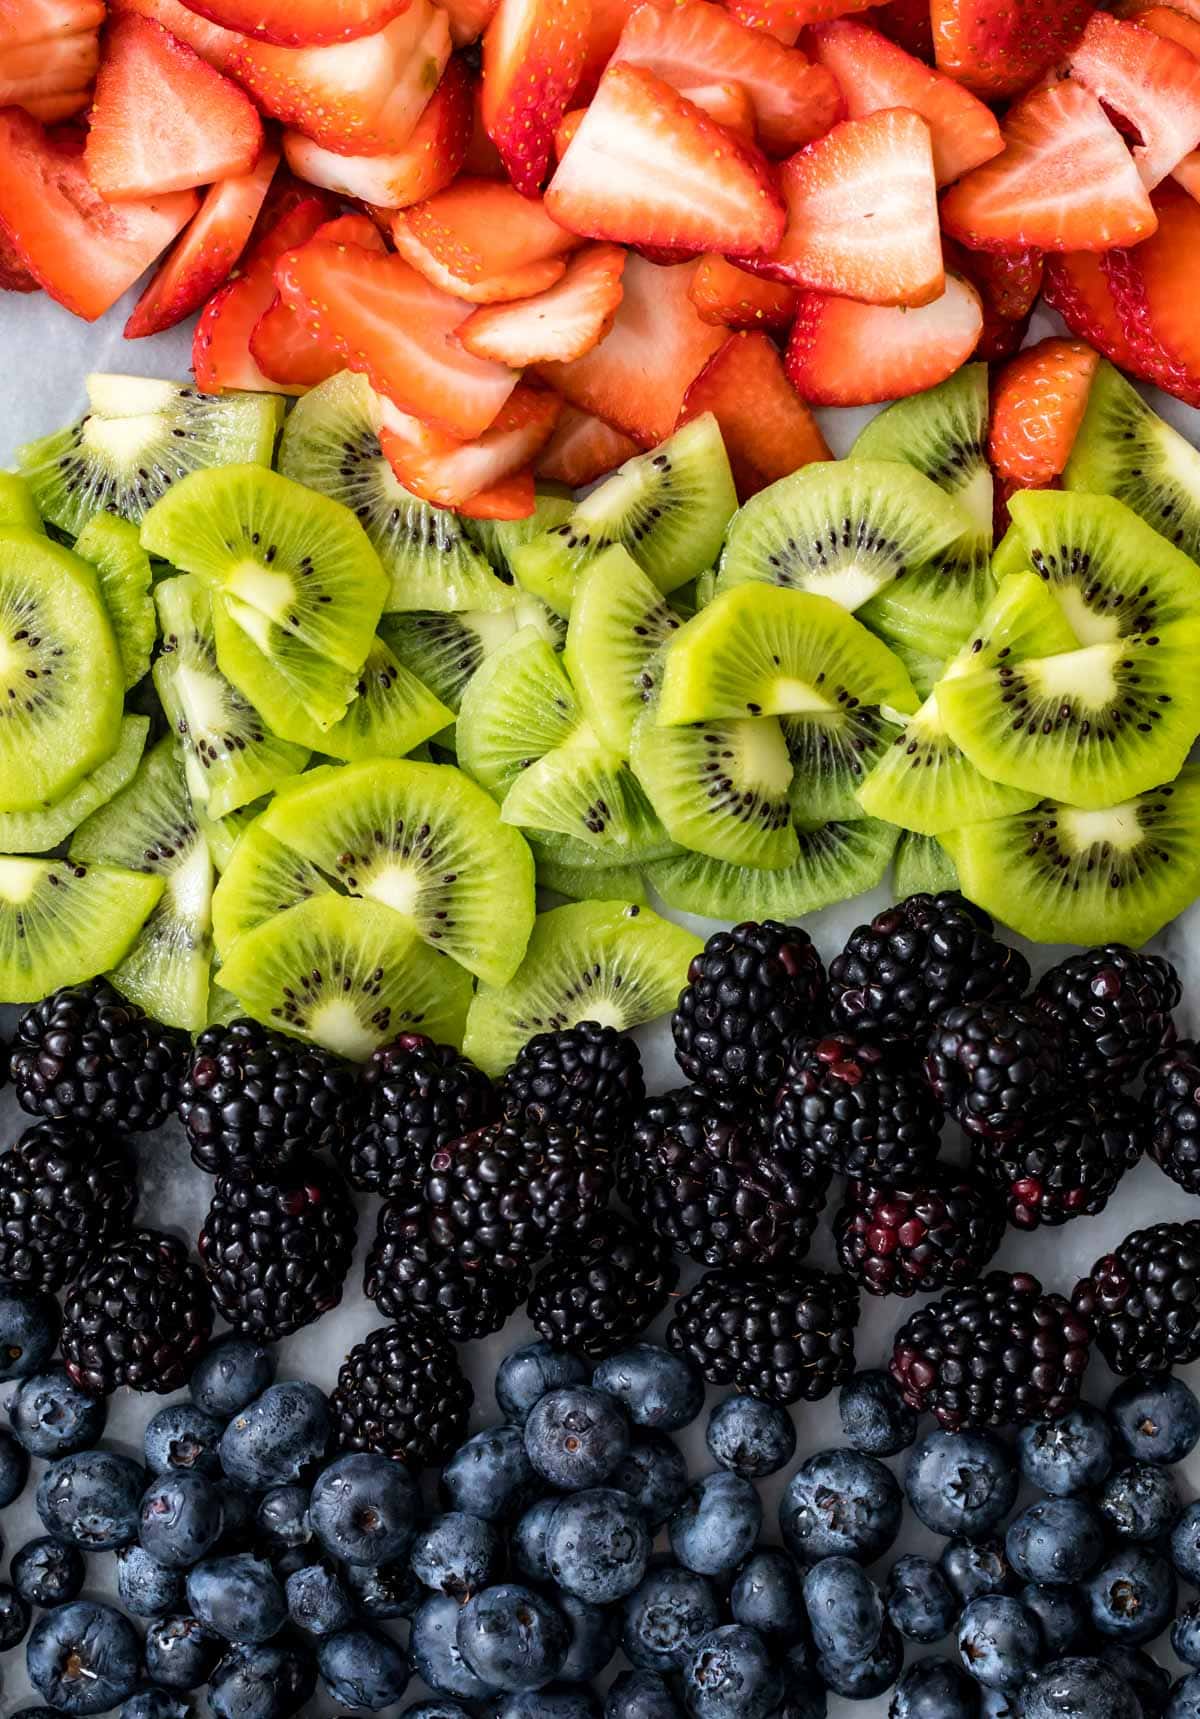 Array of fruit: strawberry and kiwi slices, blackberries and blueberries